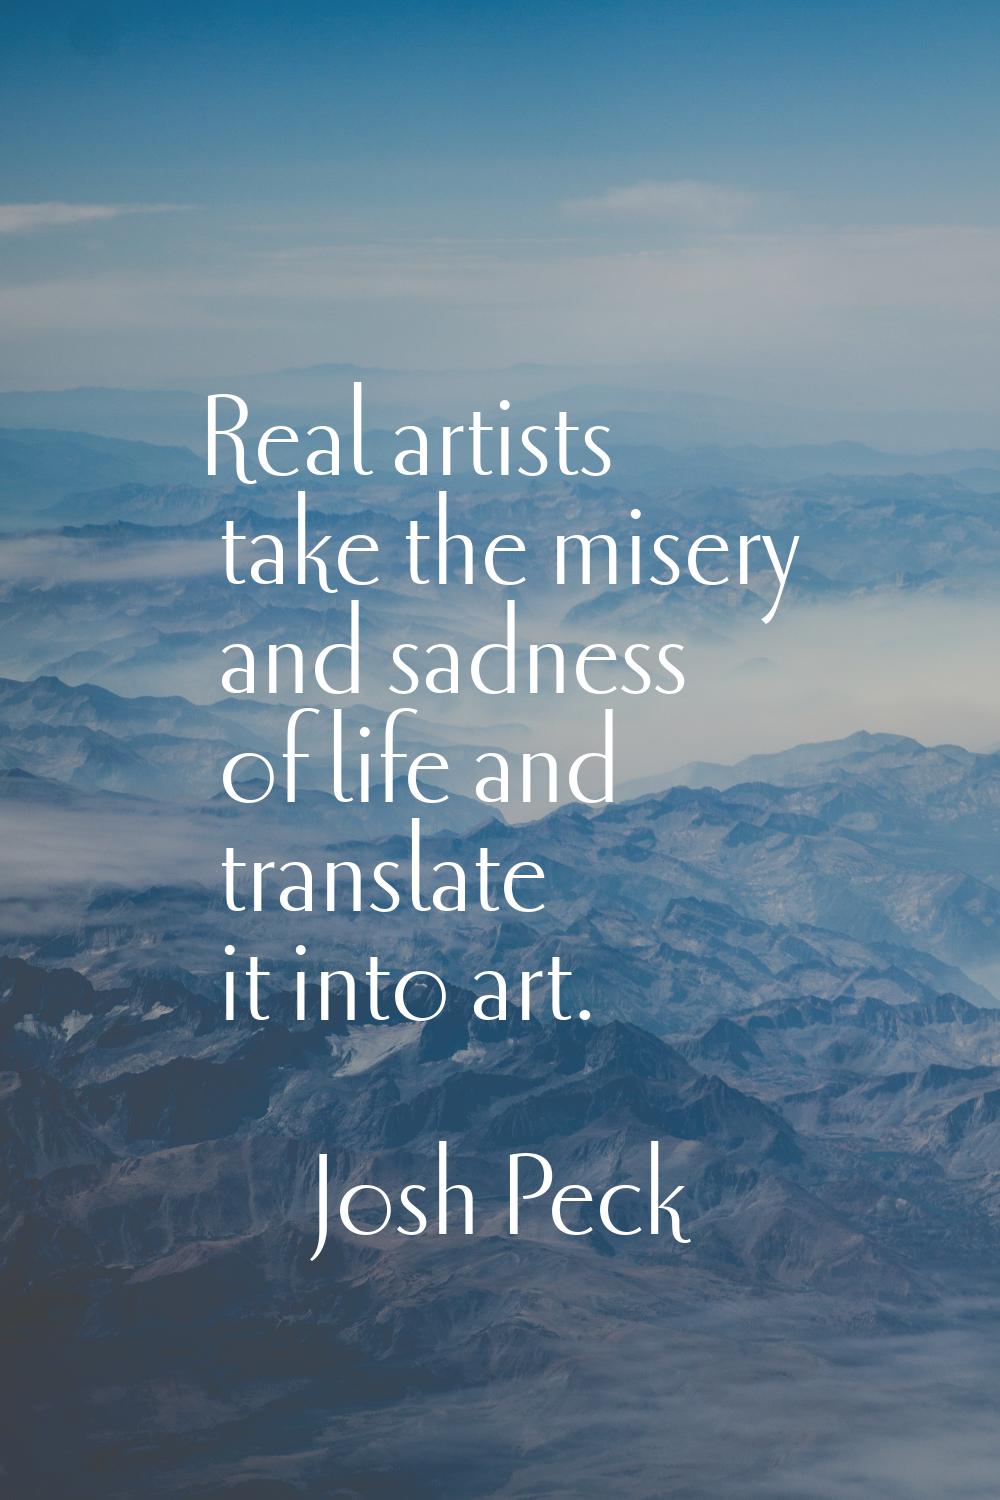 Real artists take the misery and sadness of life and translate it into art.